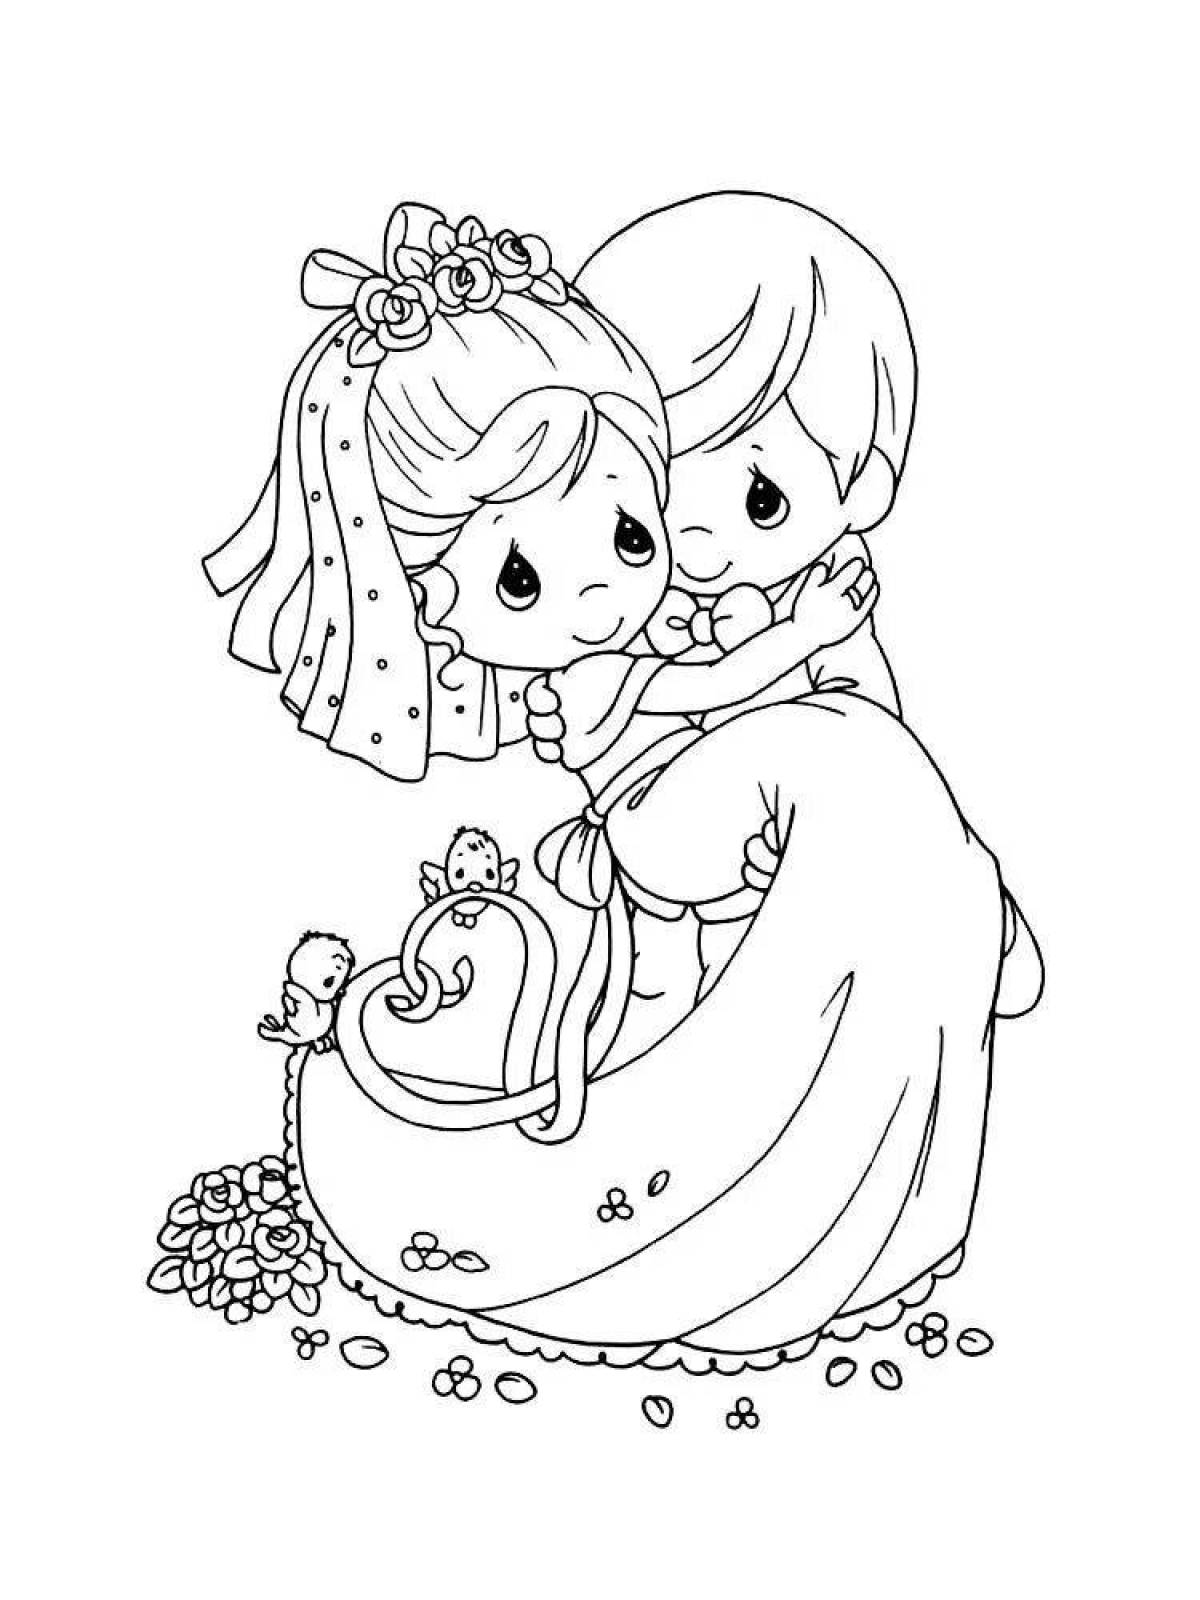 Glorious bride and groom coloring page